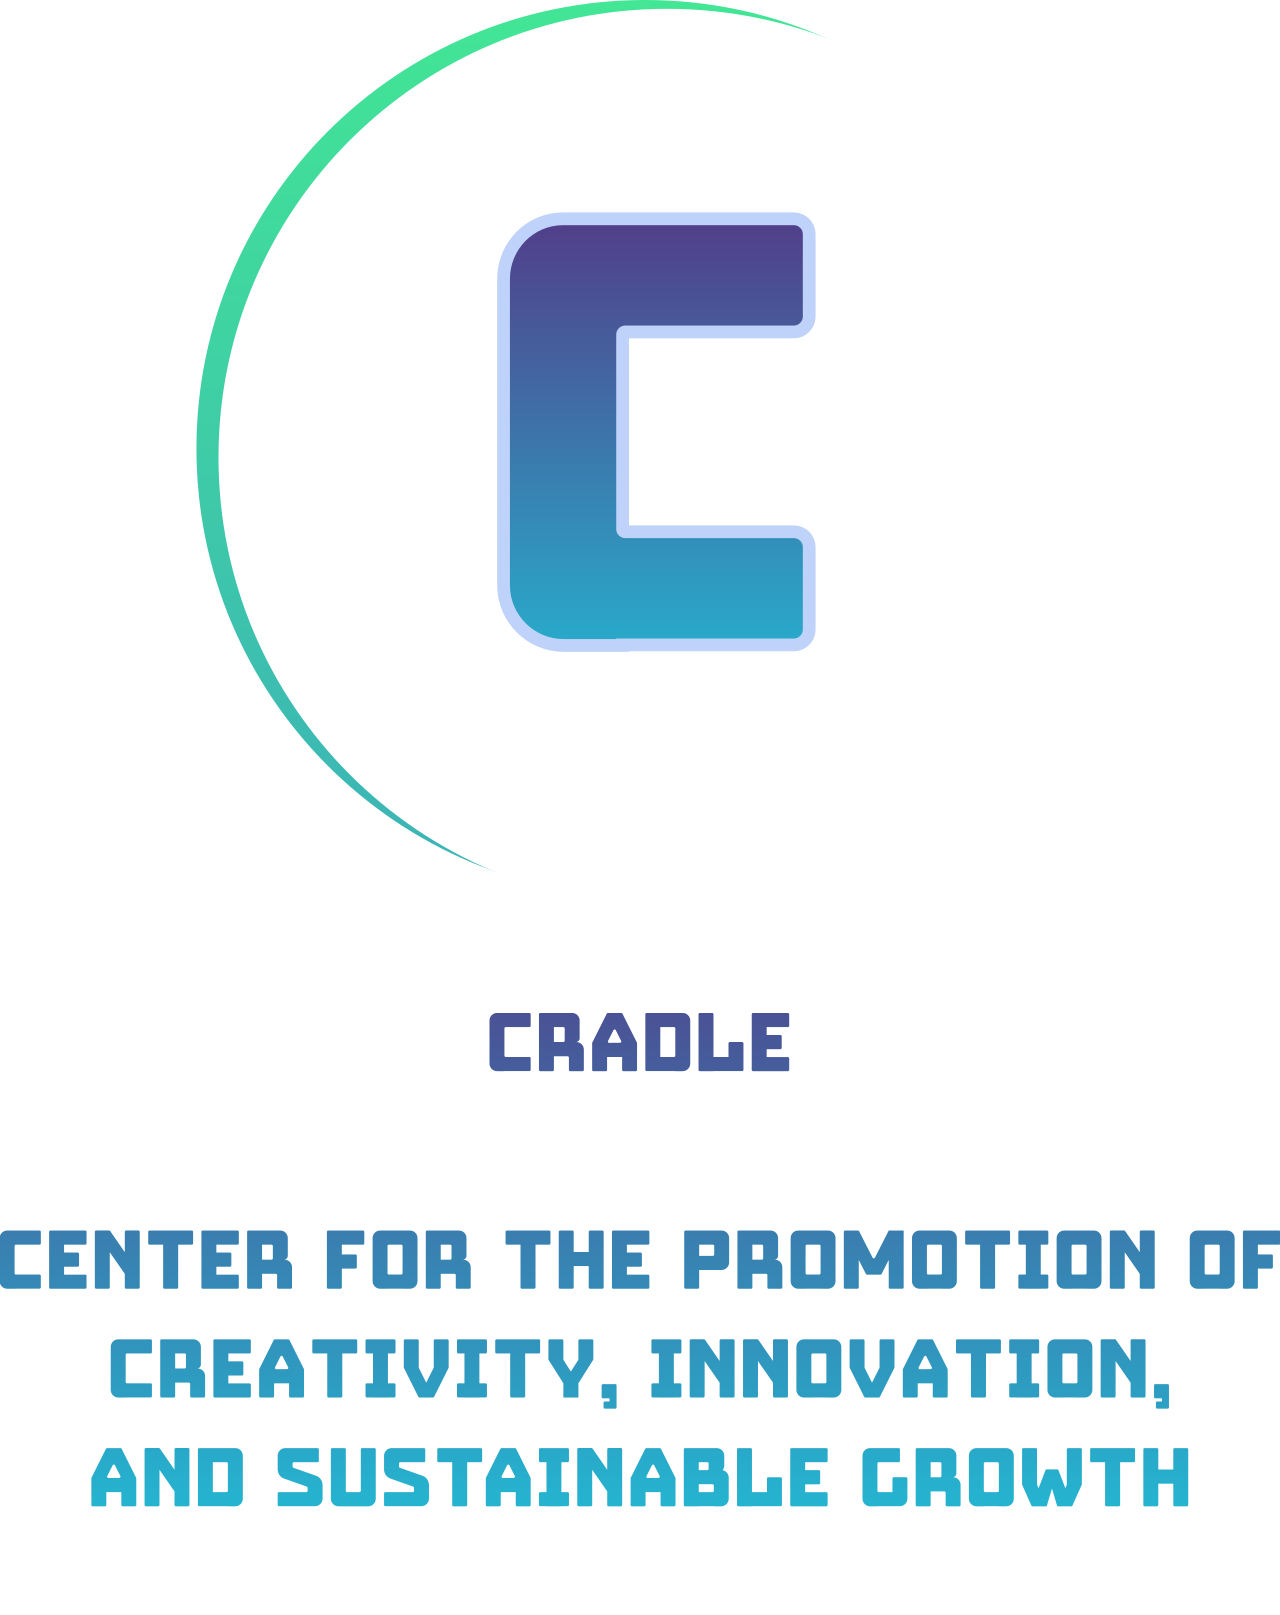 

CRADLE

Center for the promotion of
 Creativity, Innovation, 
and Sustainable Growth
's web page